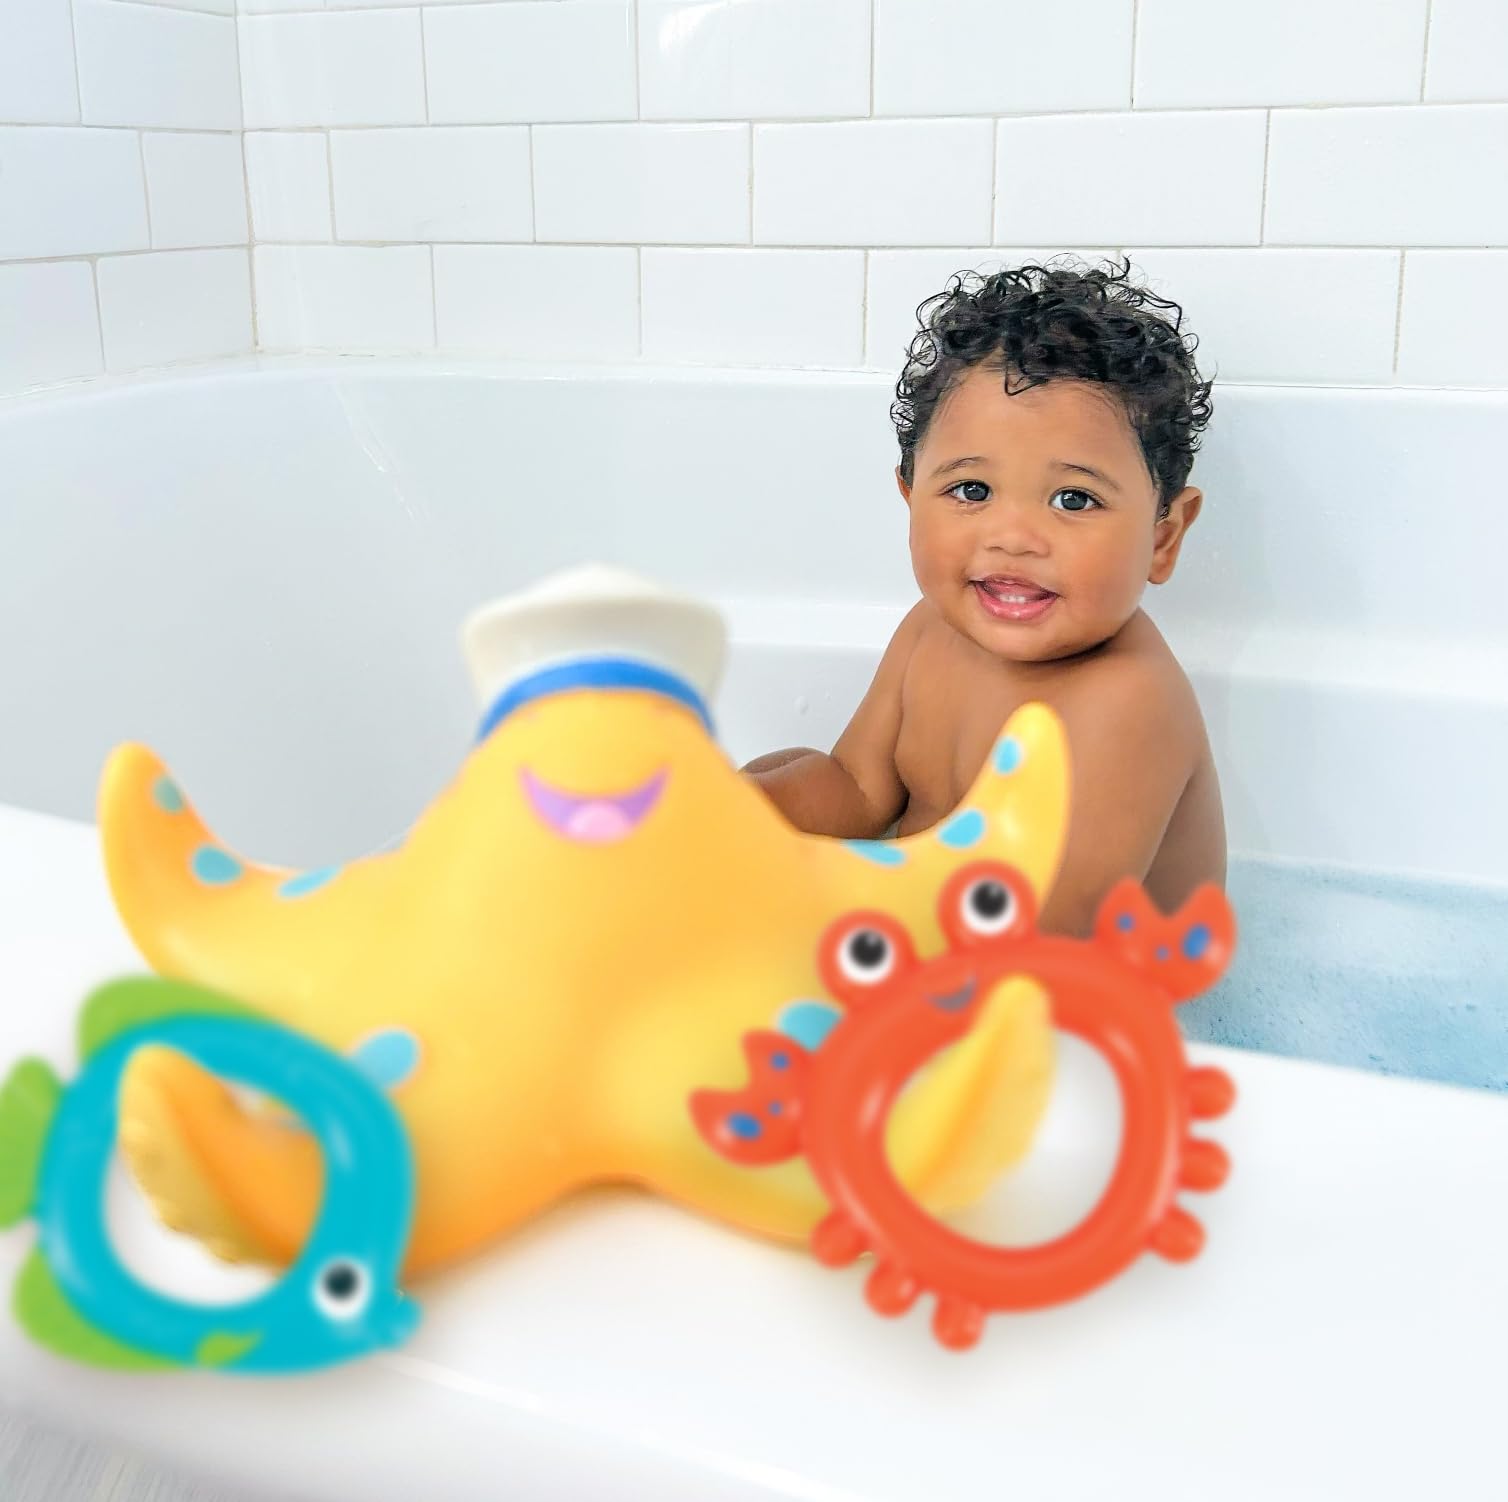 Nuby Starfish Ring Toss Bath Toy, Includes 3 Toss Rings (Crabfish, Tropical Fish and Seahorse)